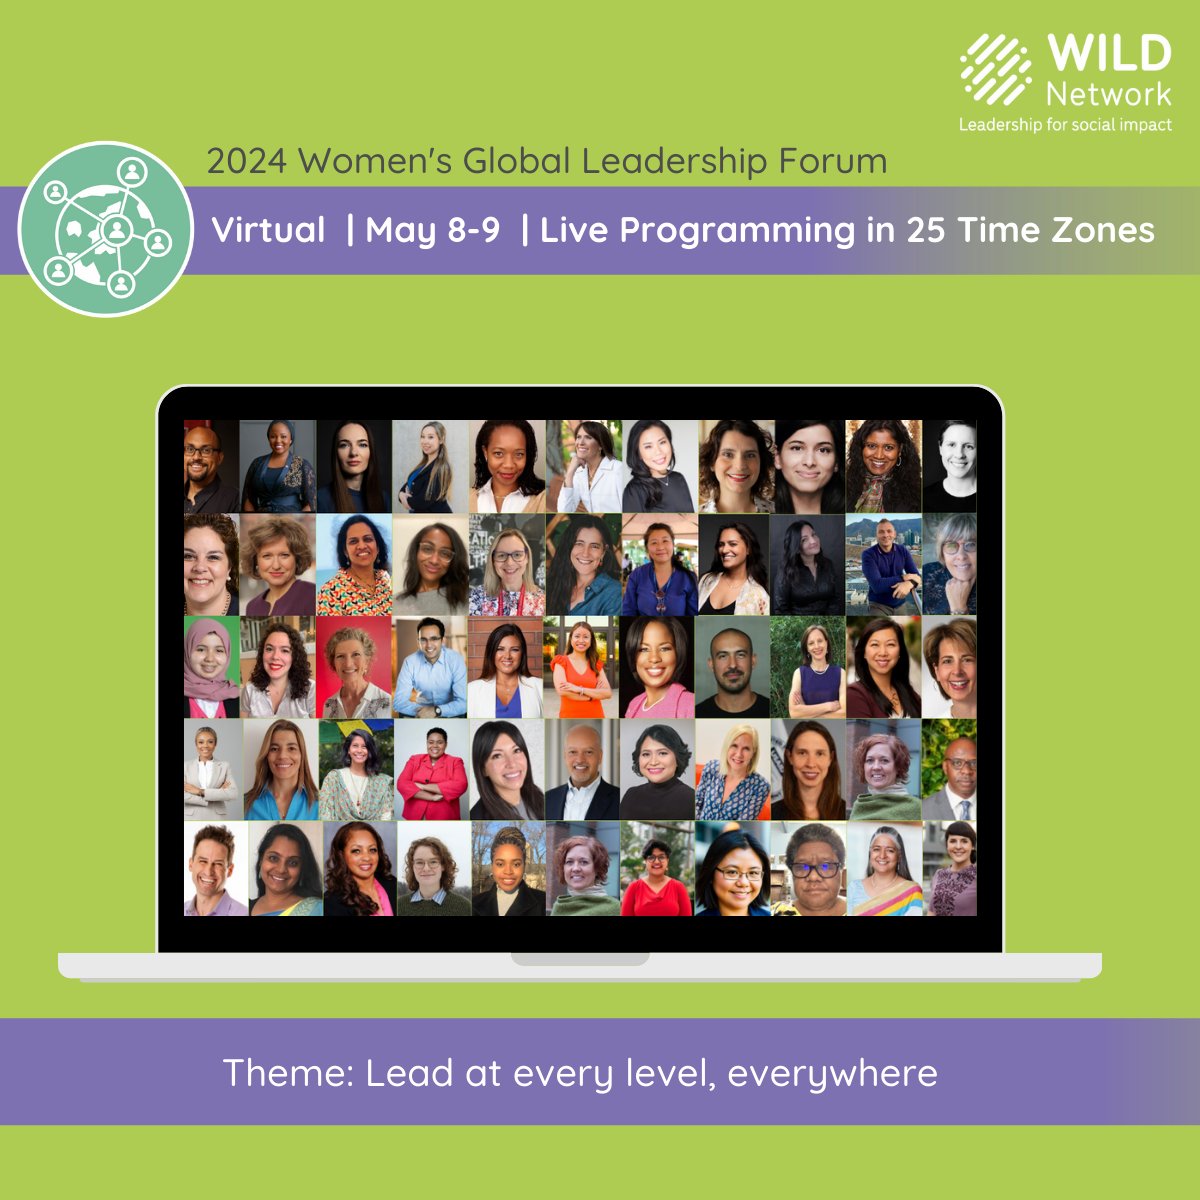 MSH is proud to have local partners @FahimaNaziri from the Afghan Midwives Assn and Bezawit Tesfaye from @U3Advisors join our delegation this week at the @WILDinnovators 2024 Women’s Global Leadership Forum. Be part of the conversation. Register today! thewildnetwork.org/forum/